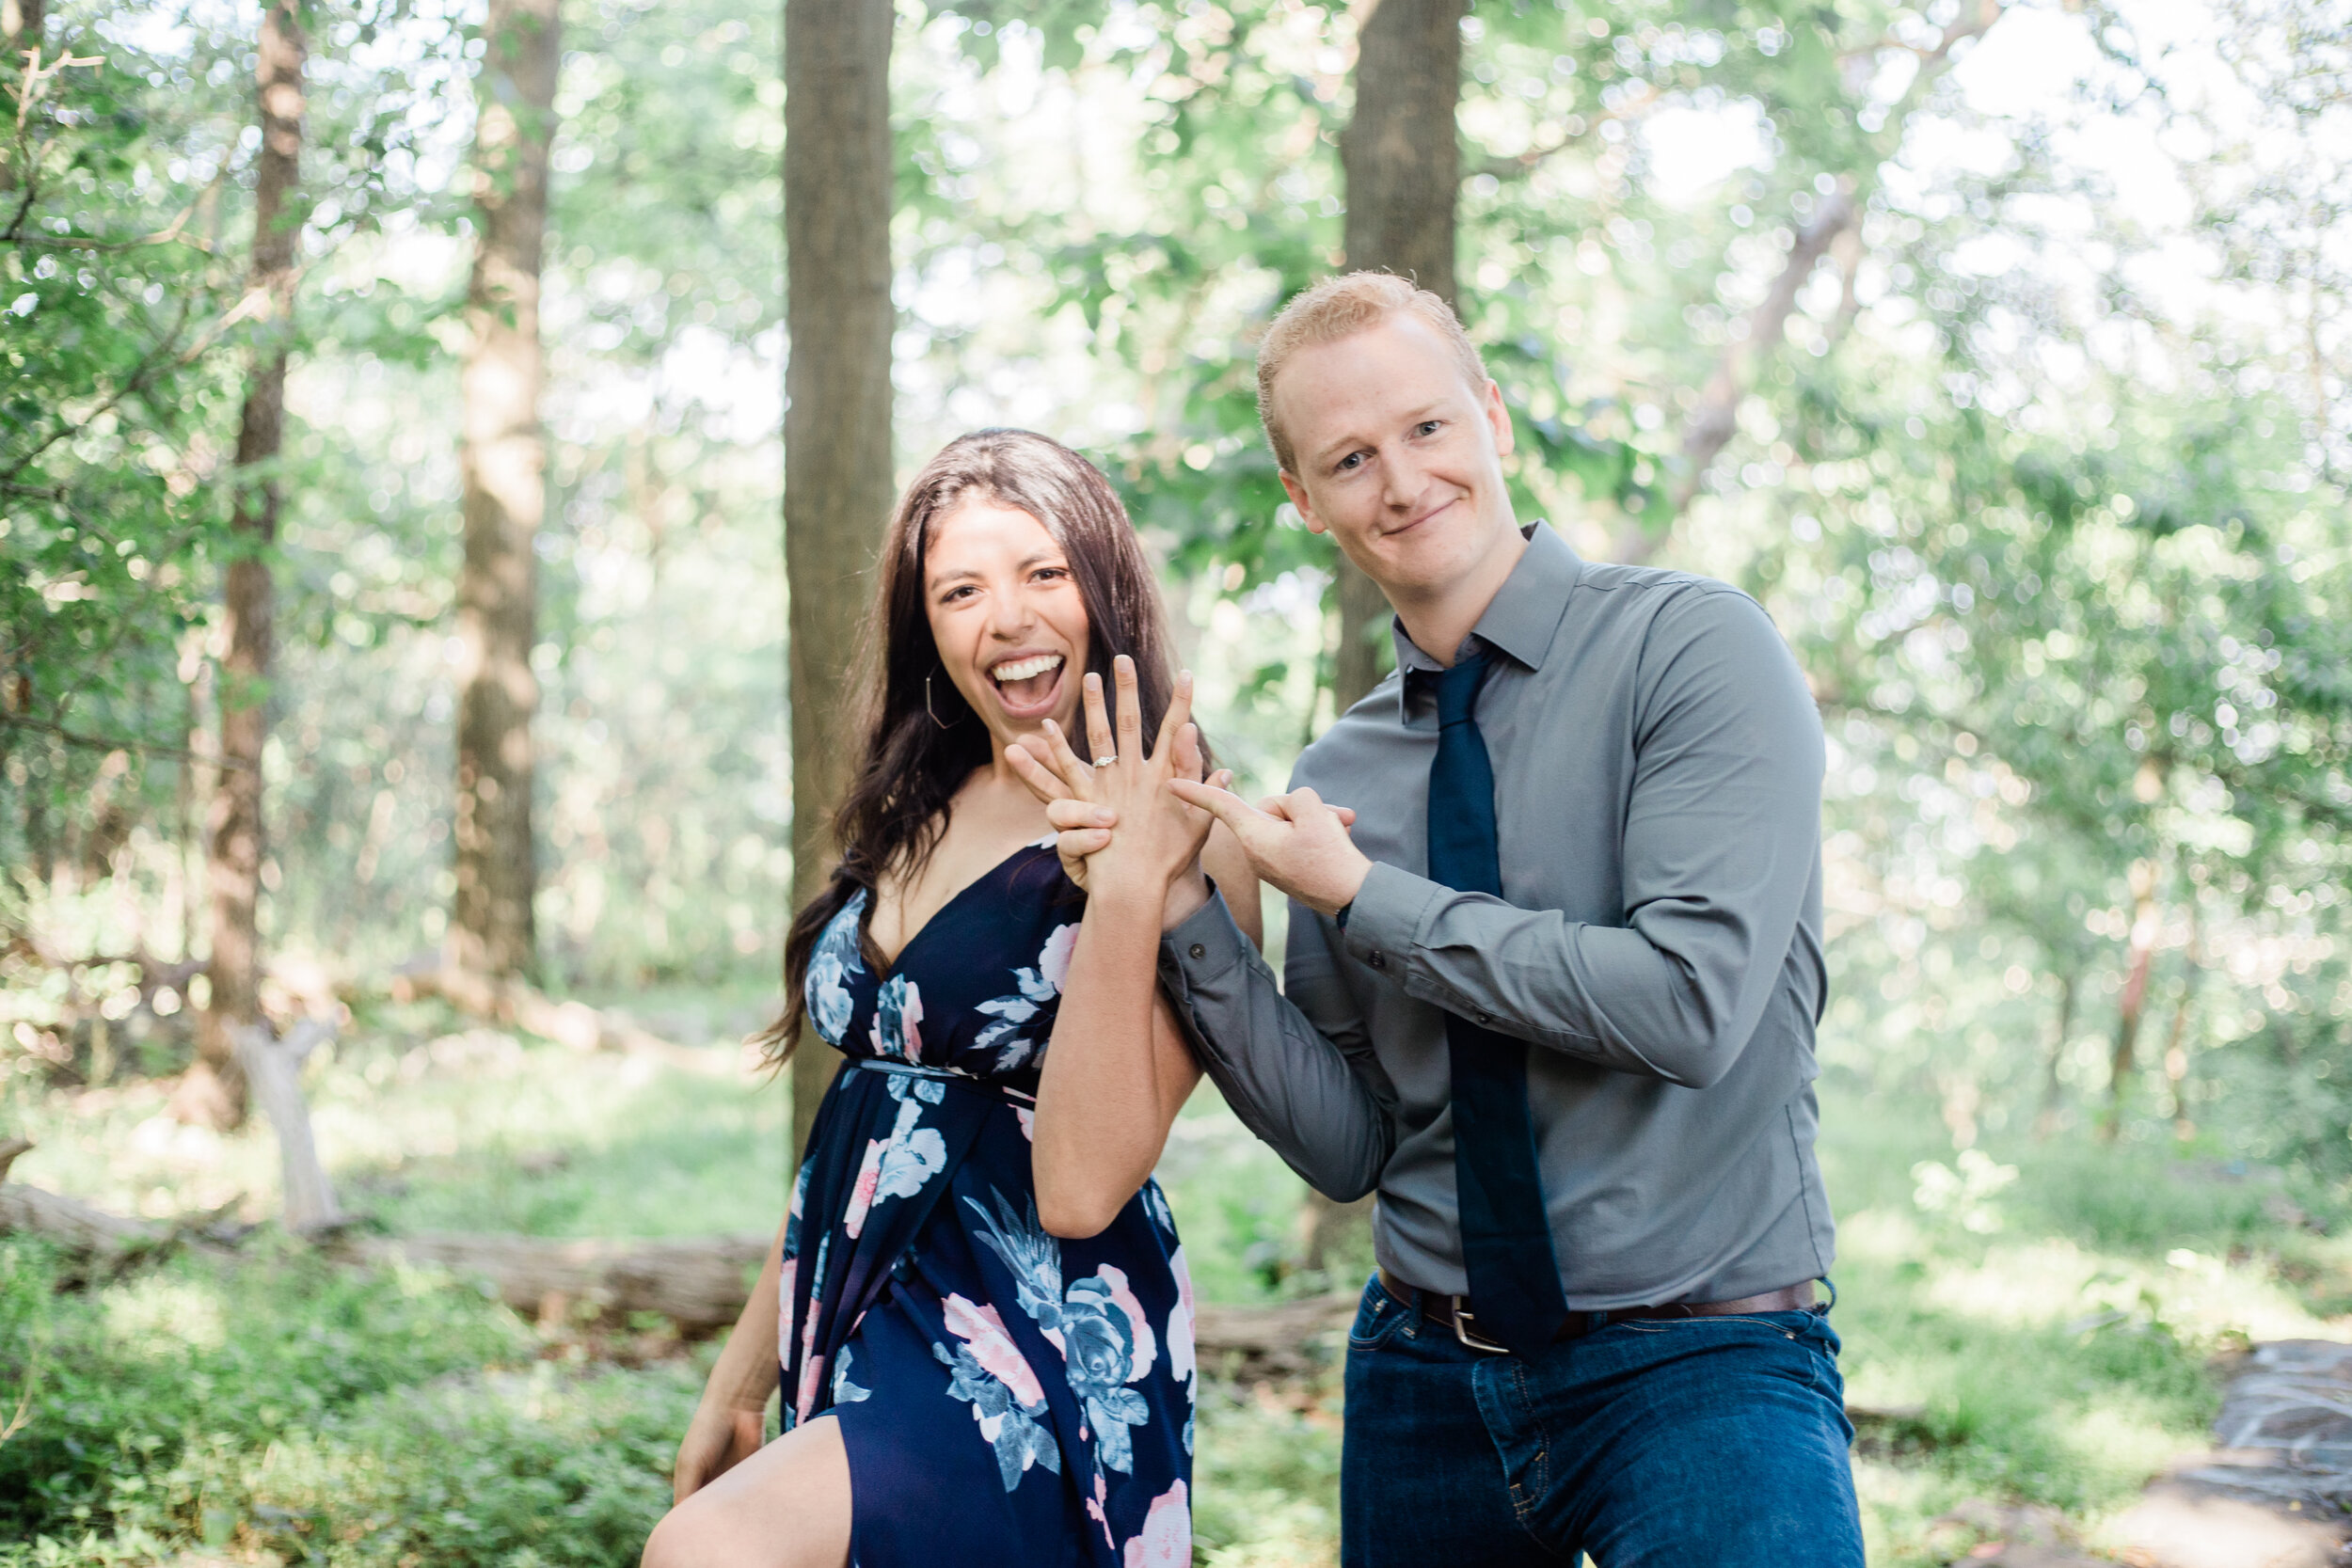 Engagement Session at High Rock Mountain in Western Maryland by Megapixels Media Photography best husband and wife wedding photographers-28.jpg